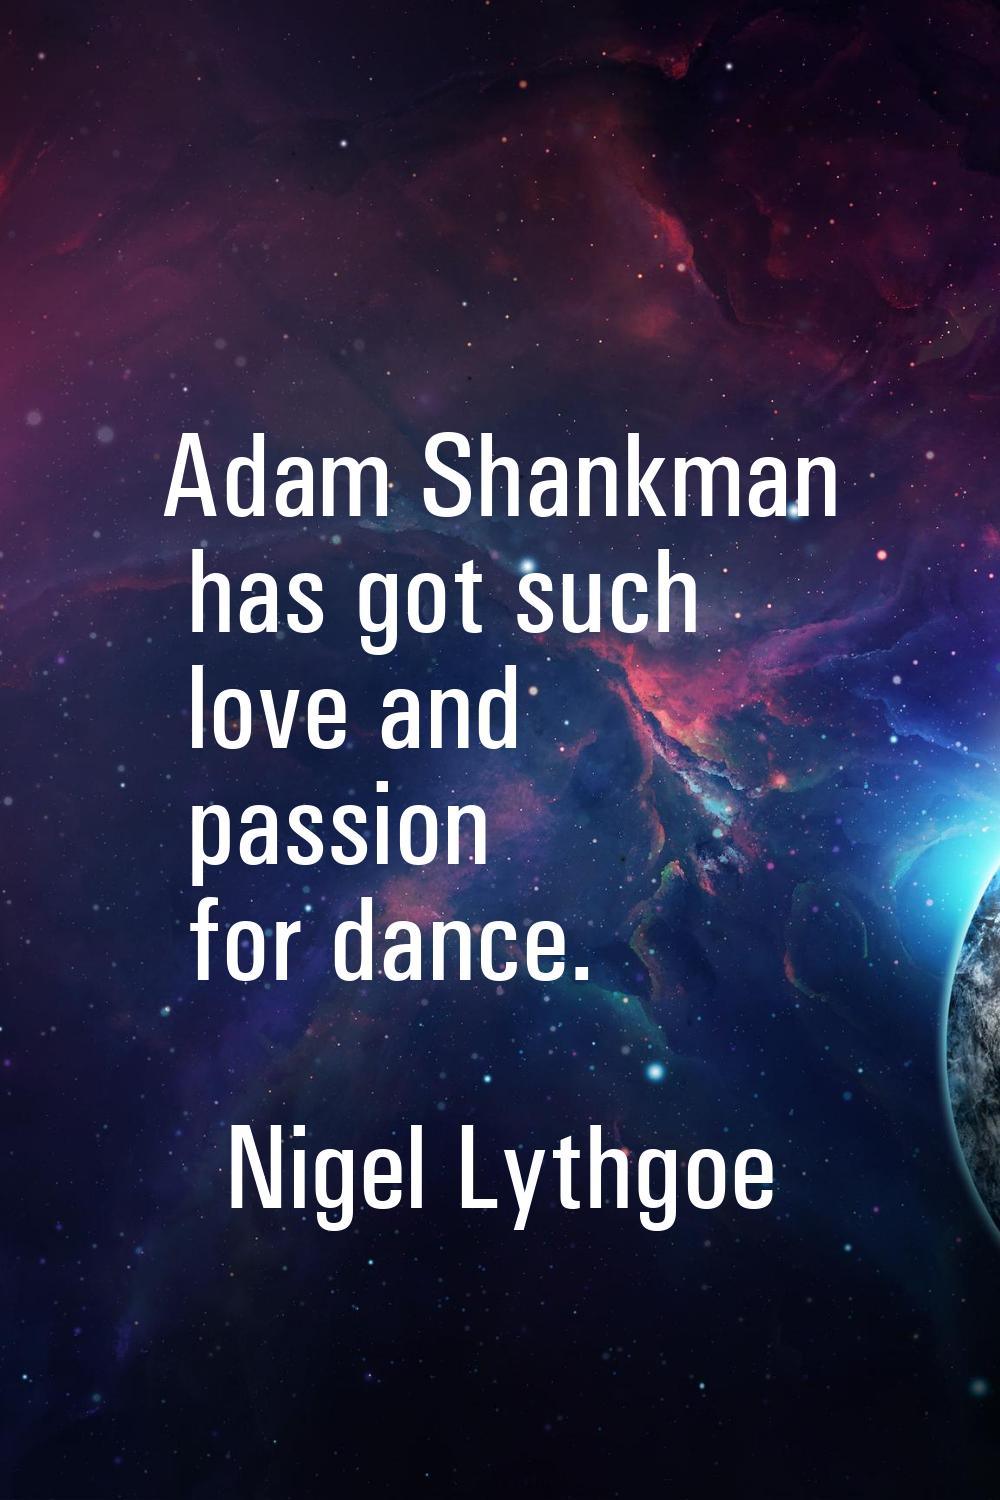 Adam Shankman has got such love and passion for dance.